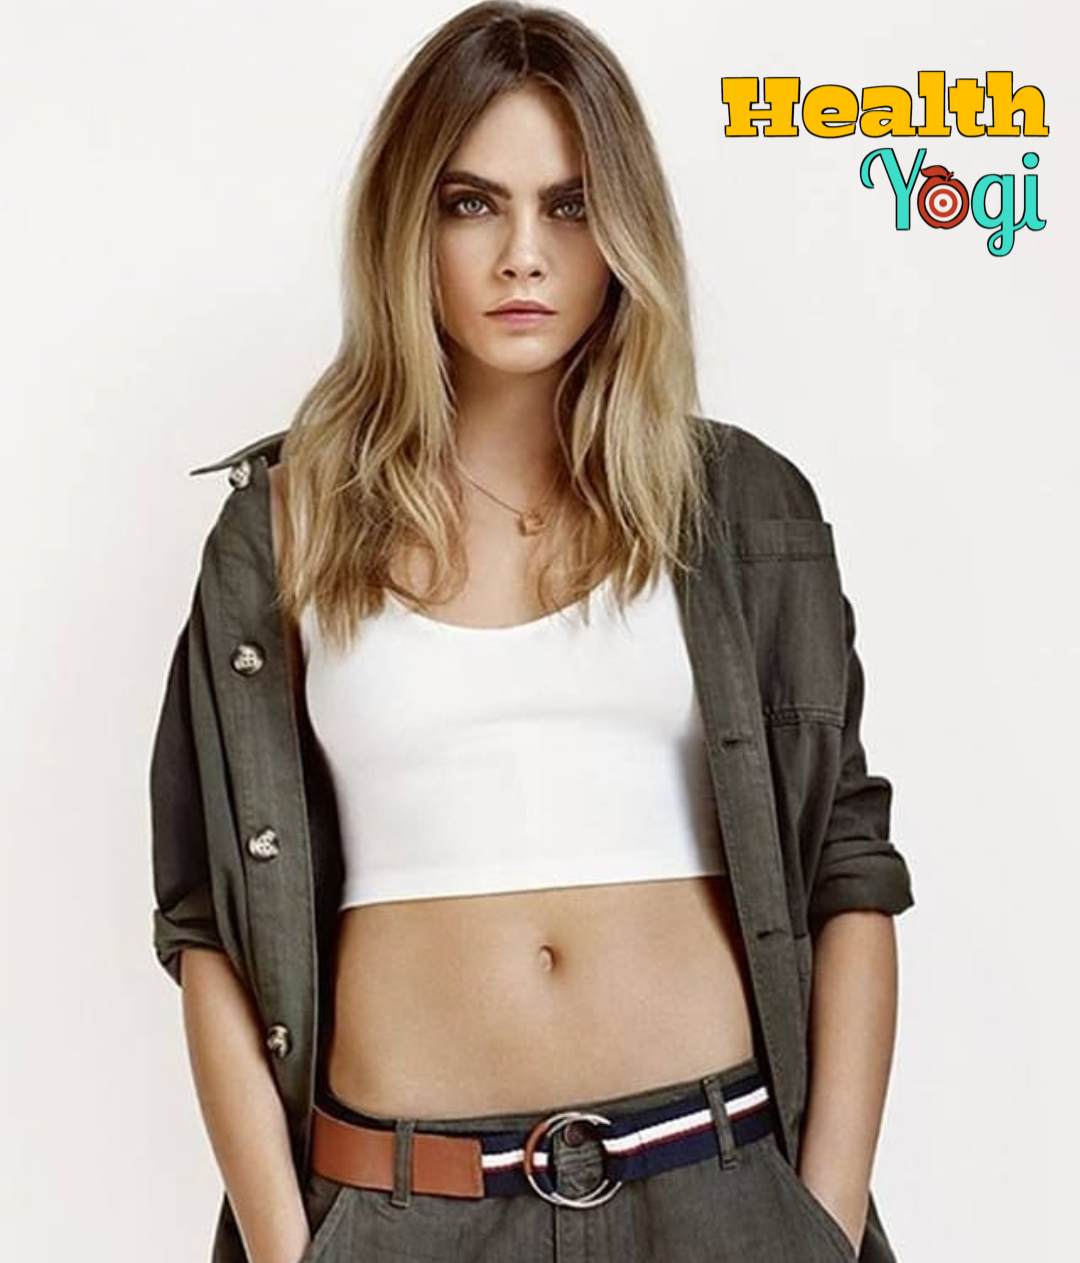 Cara Delevingne Workout Routine and Diet Plan